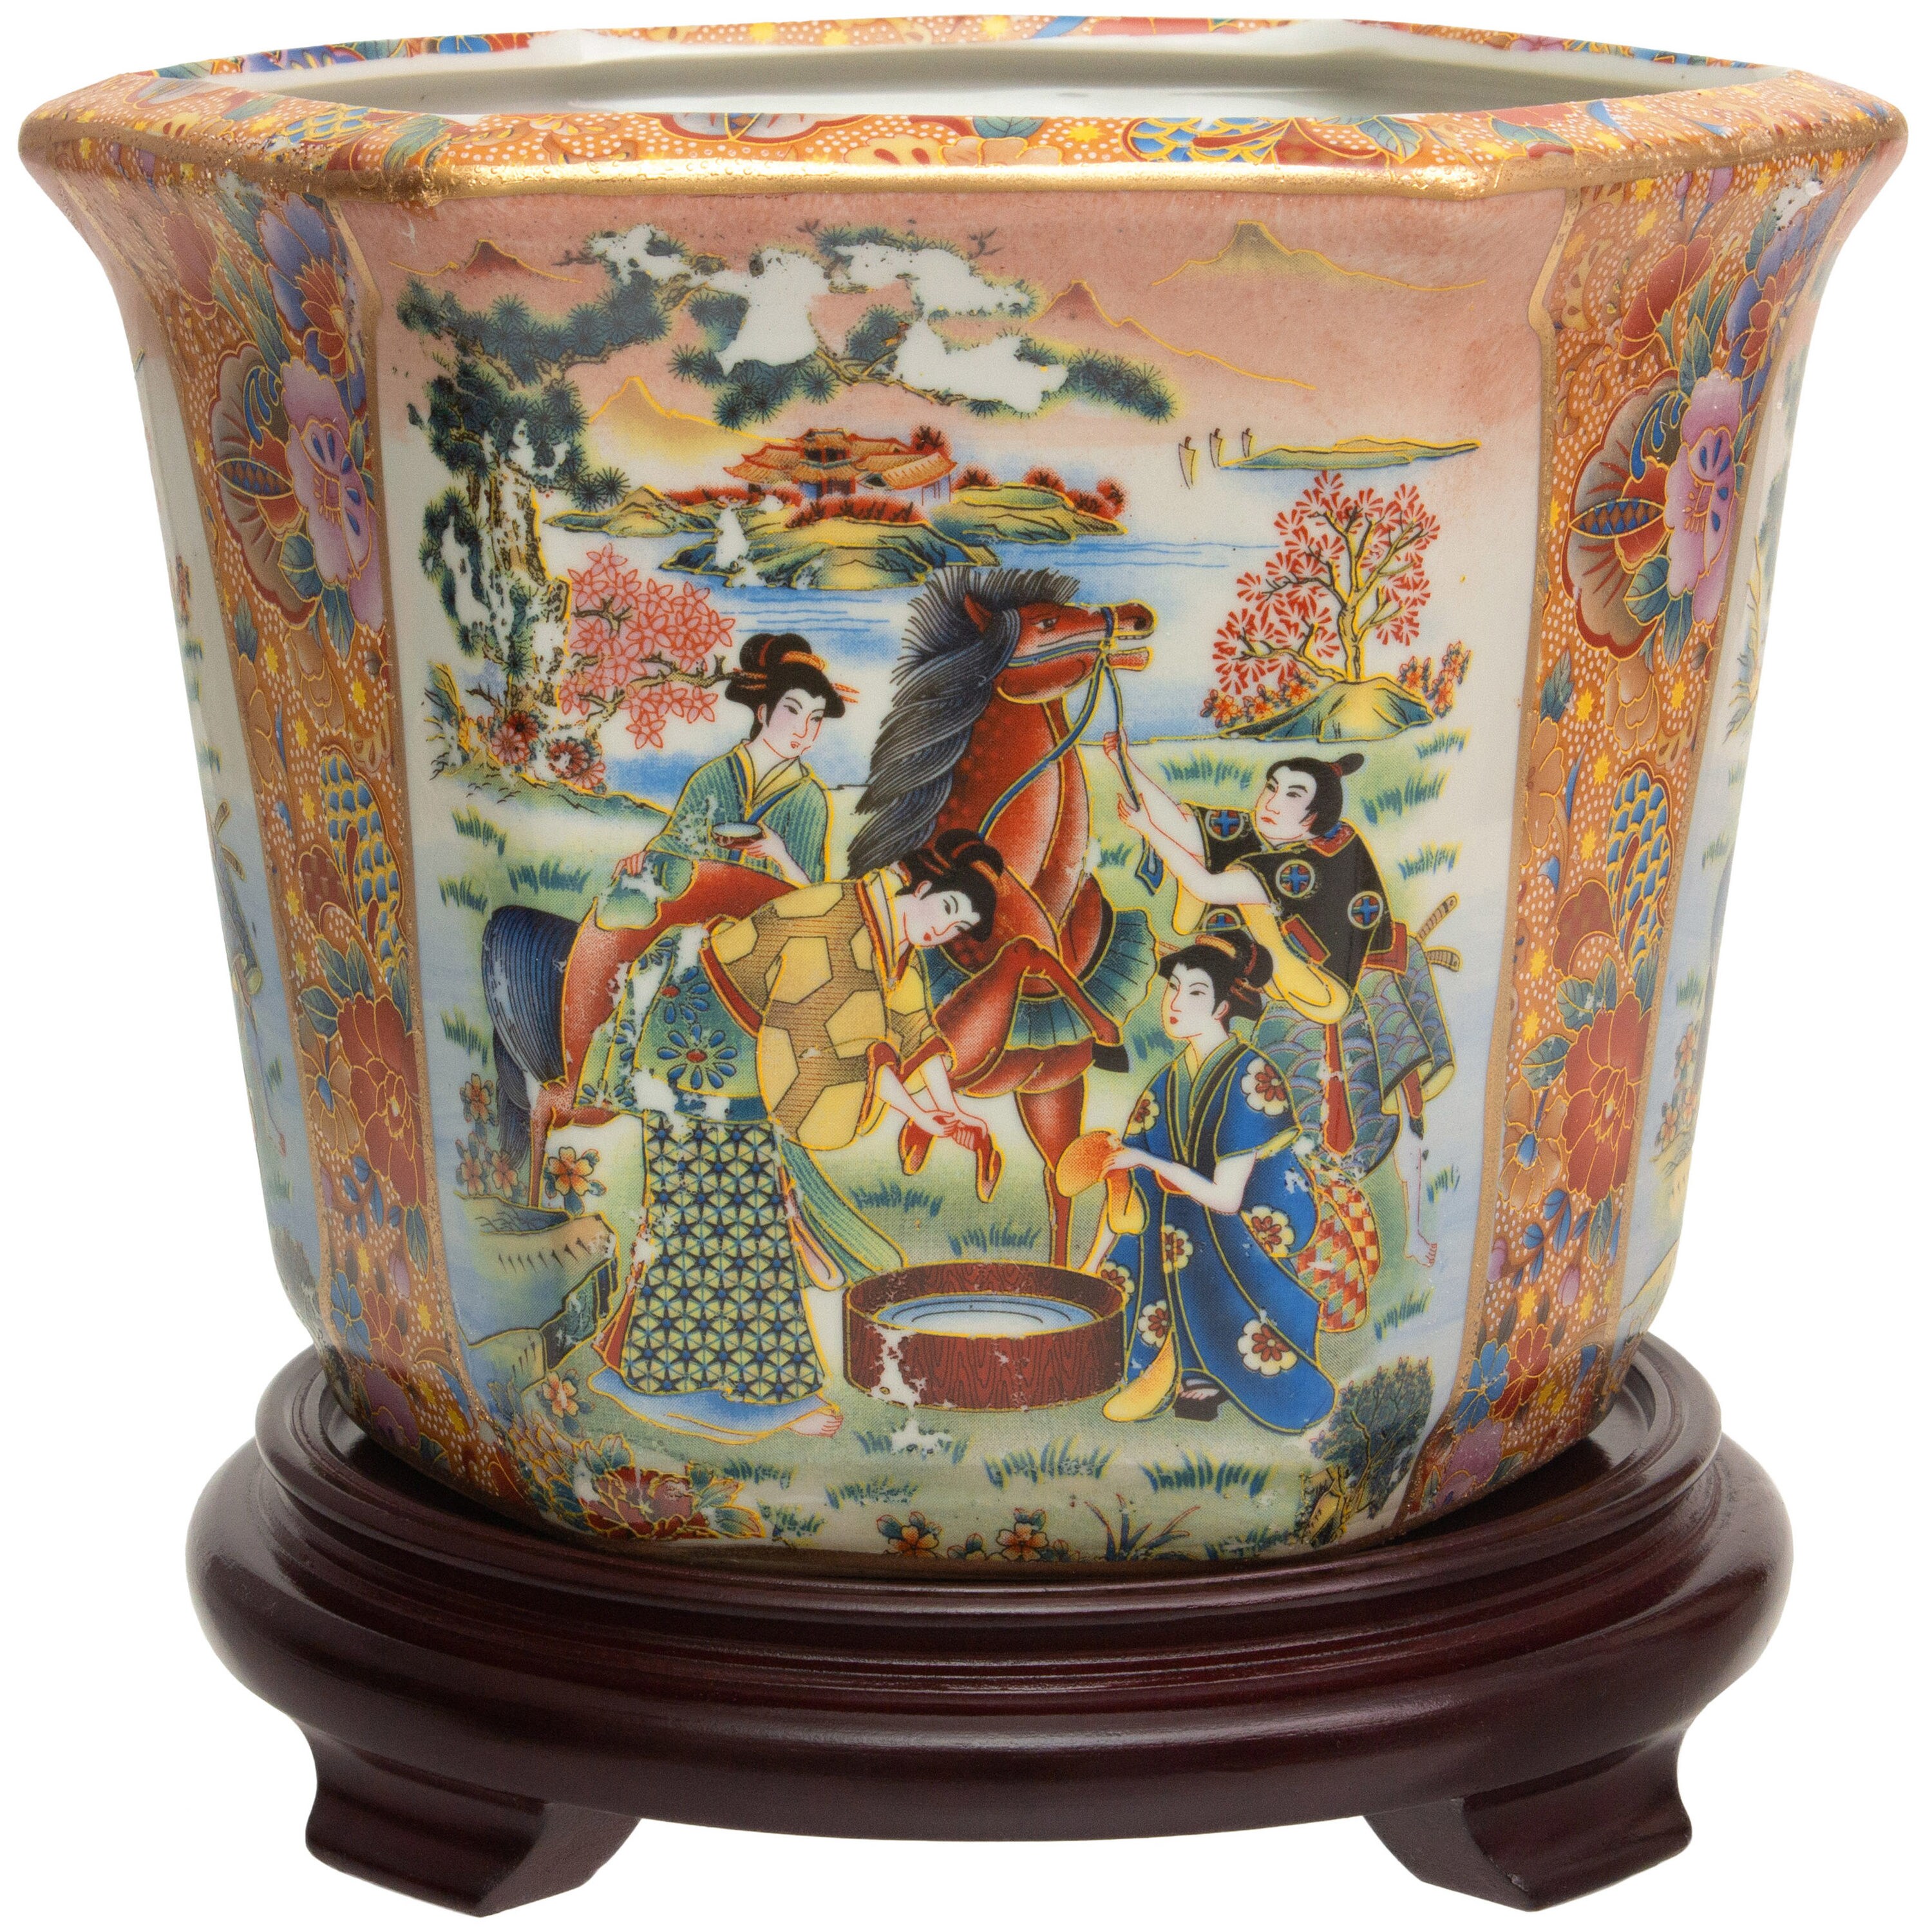 DOWNTON INTERIORS Large Oriental Ceramic Stool Side Plant Table Chinese Mandarin Style Living Rooms & Bedrooms M10091S